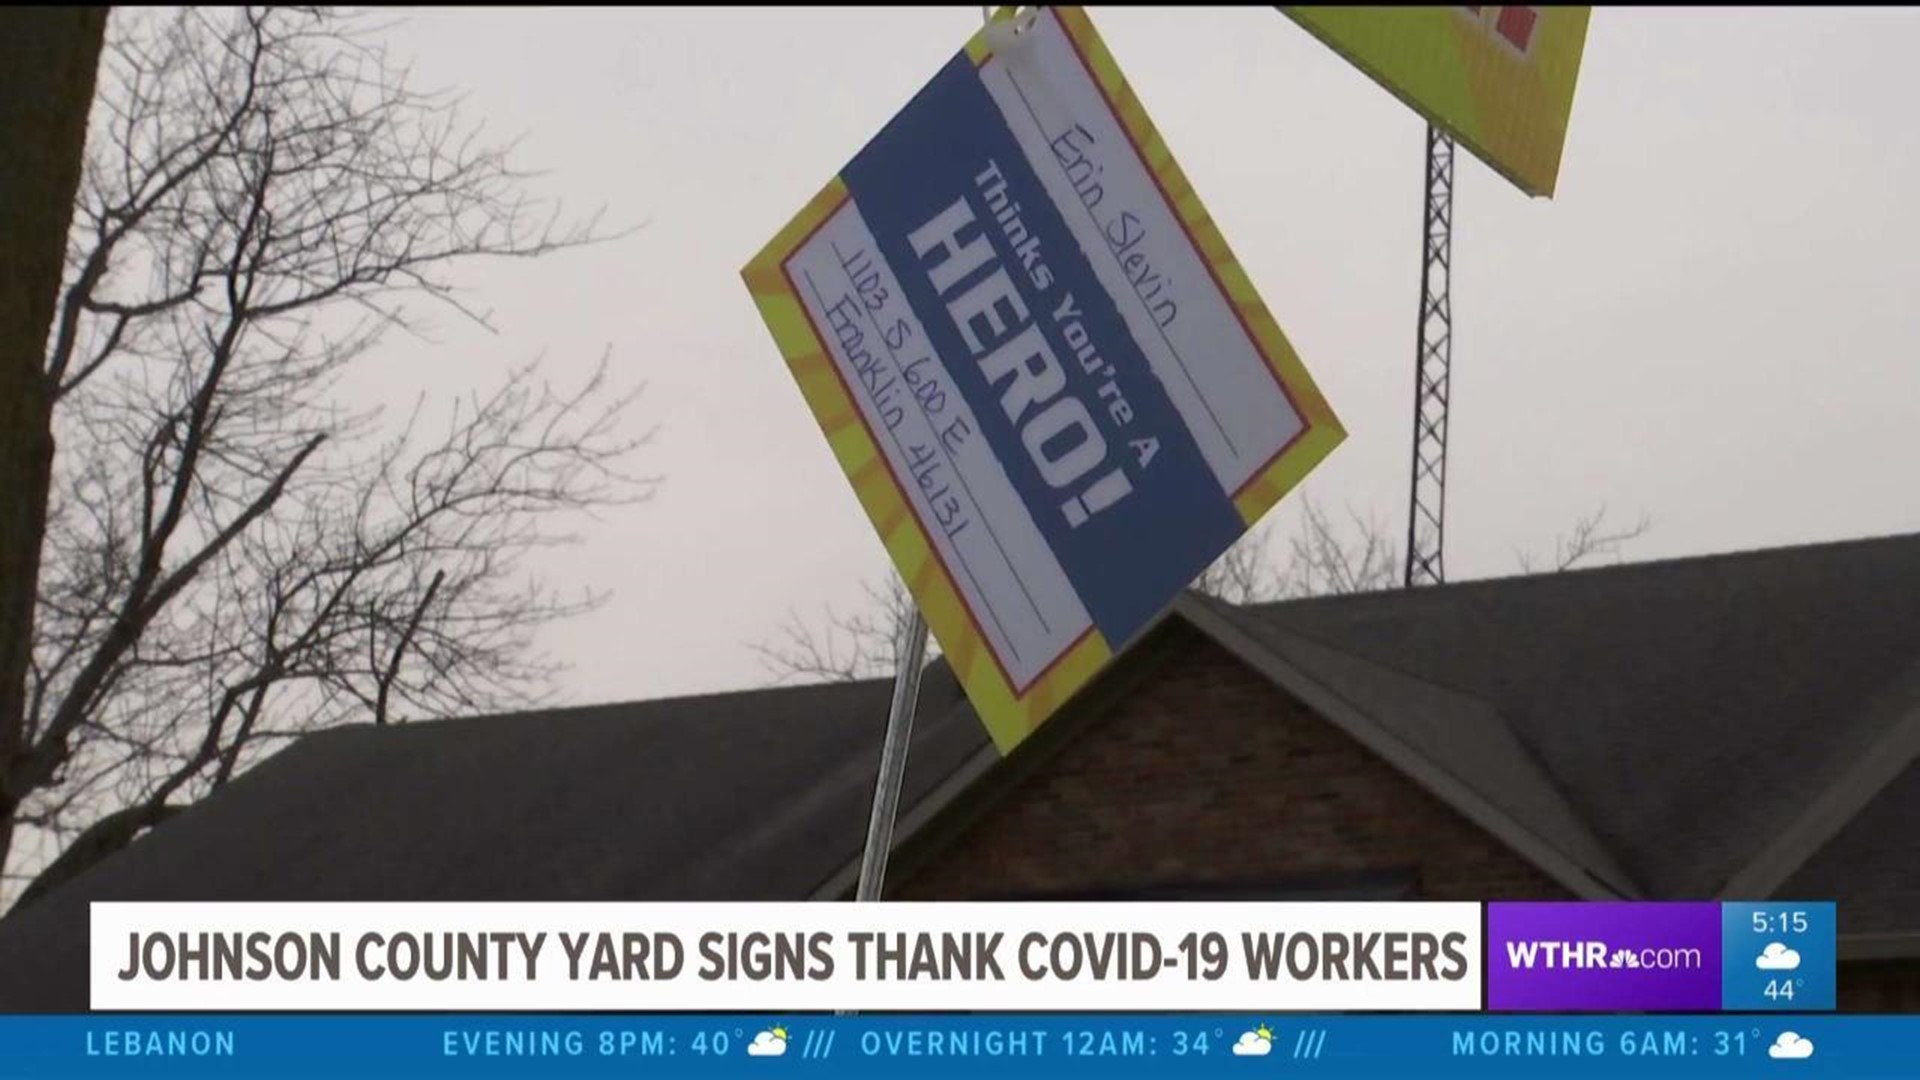 Johnson County yard signs to thank COVID-19 workers